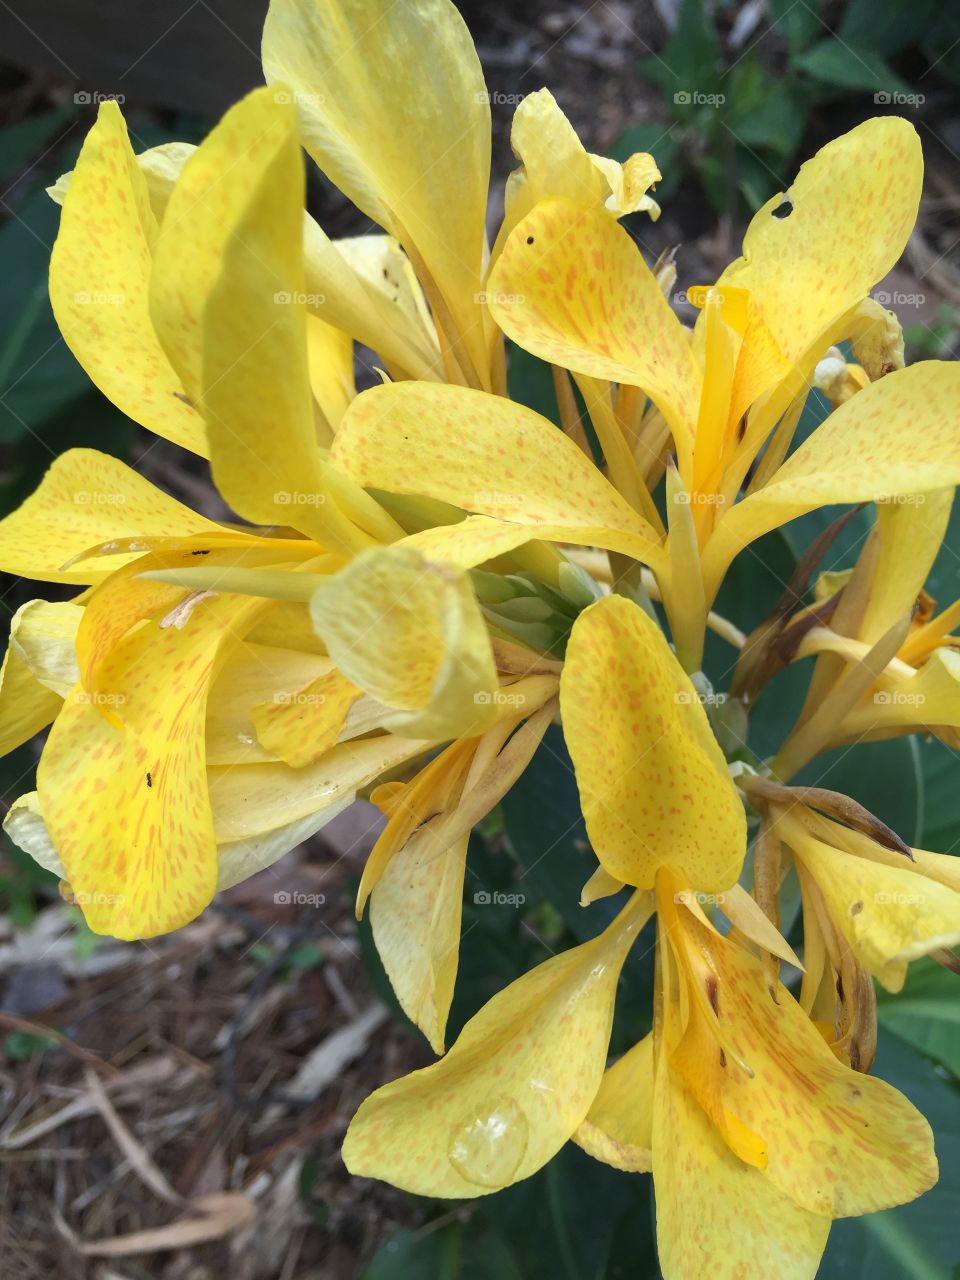 Yellow flower I saw at a flower garden in humble Texas 